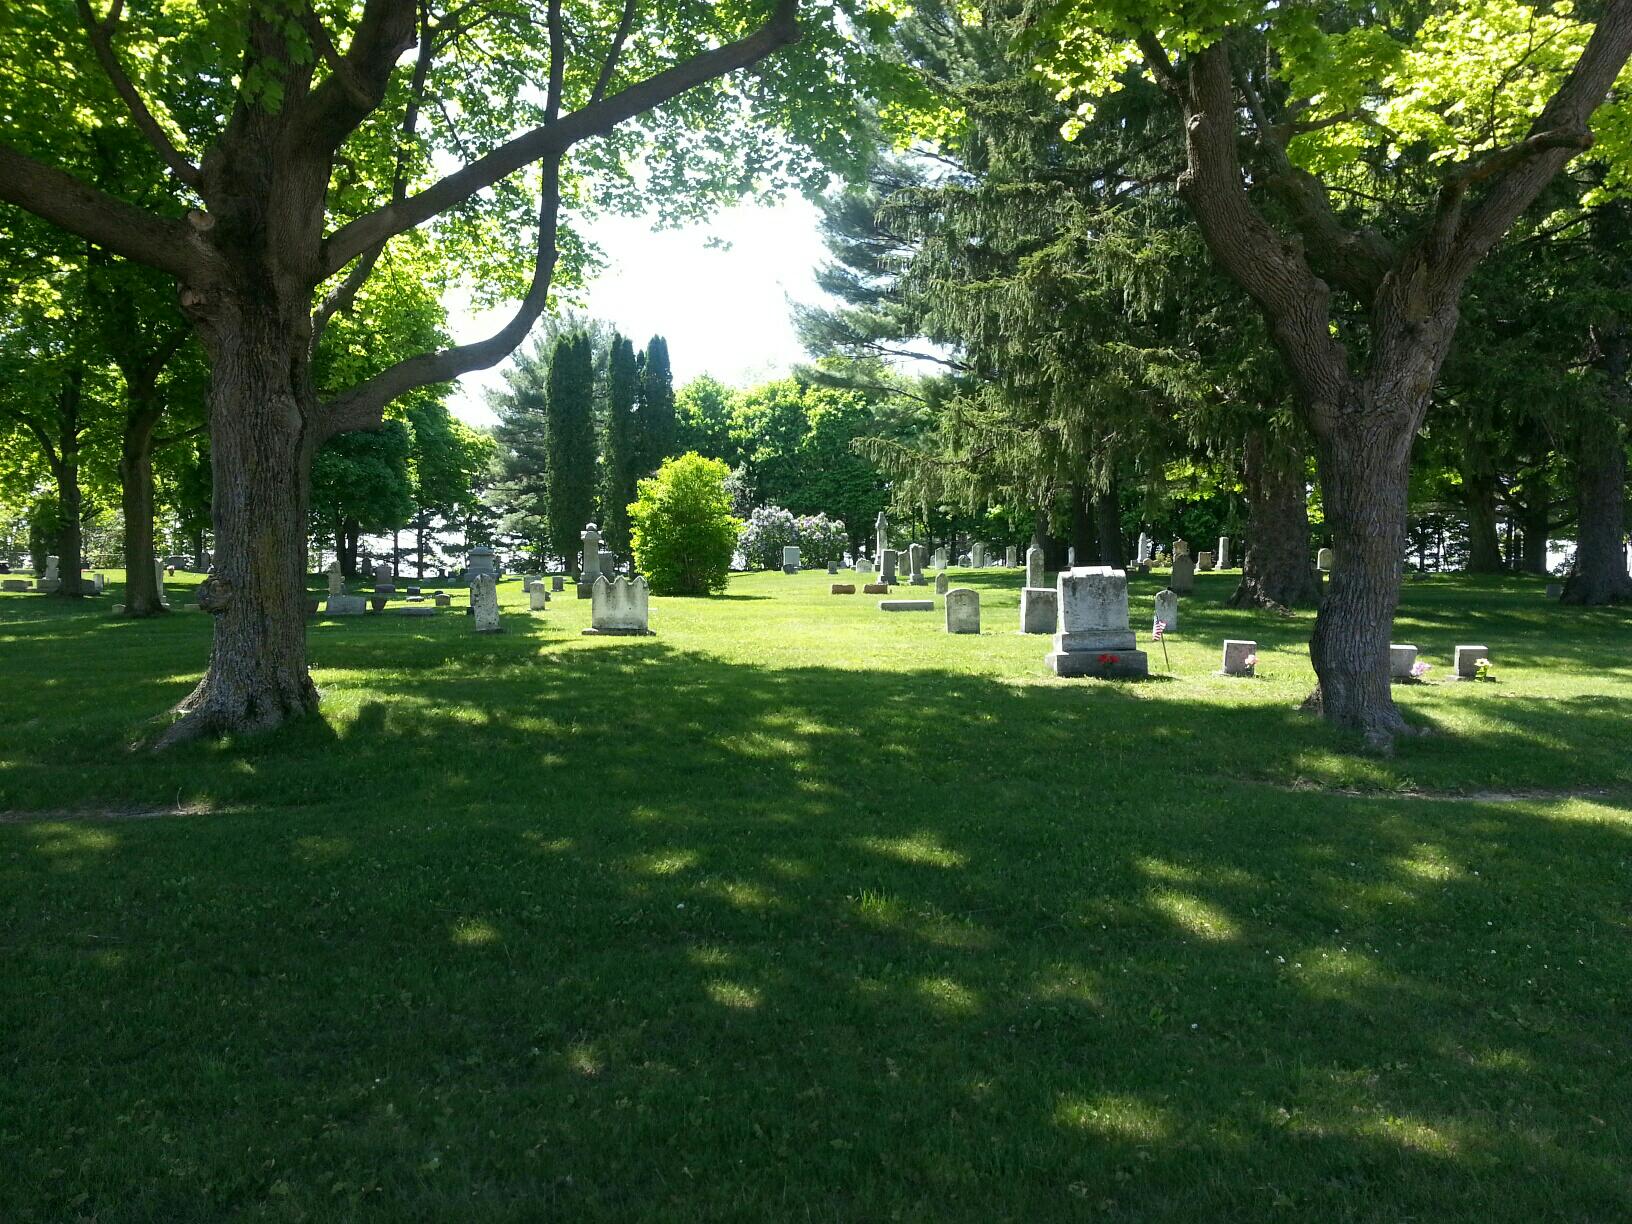 Tombs in Emersion Cemetery